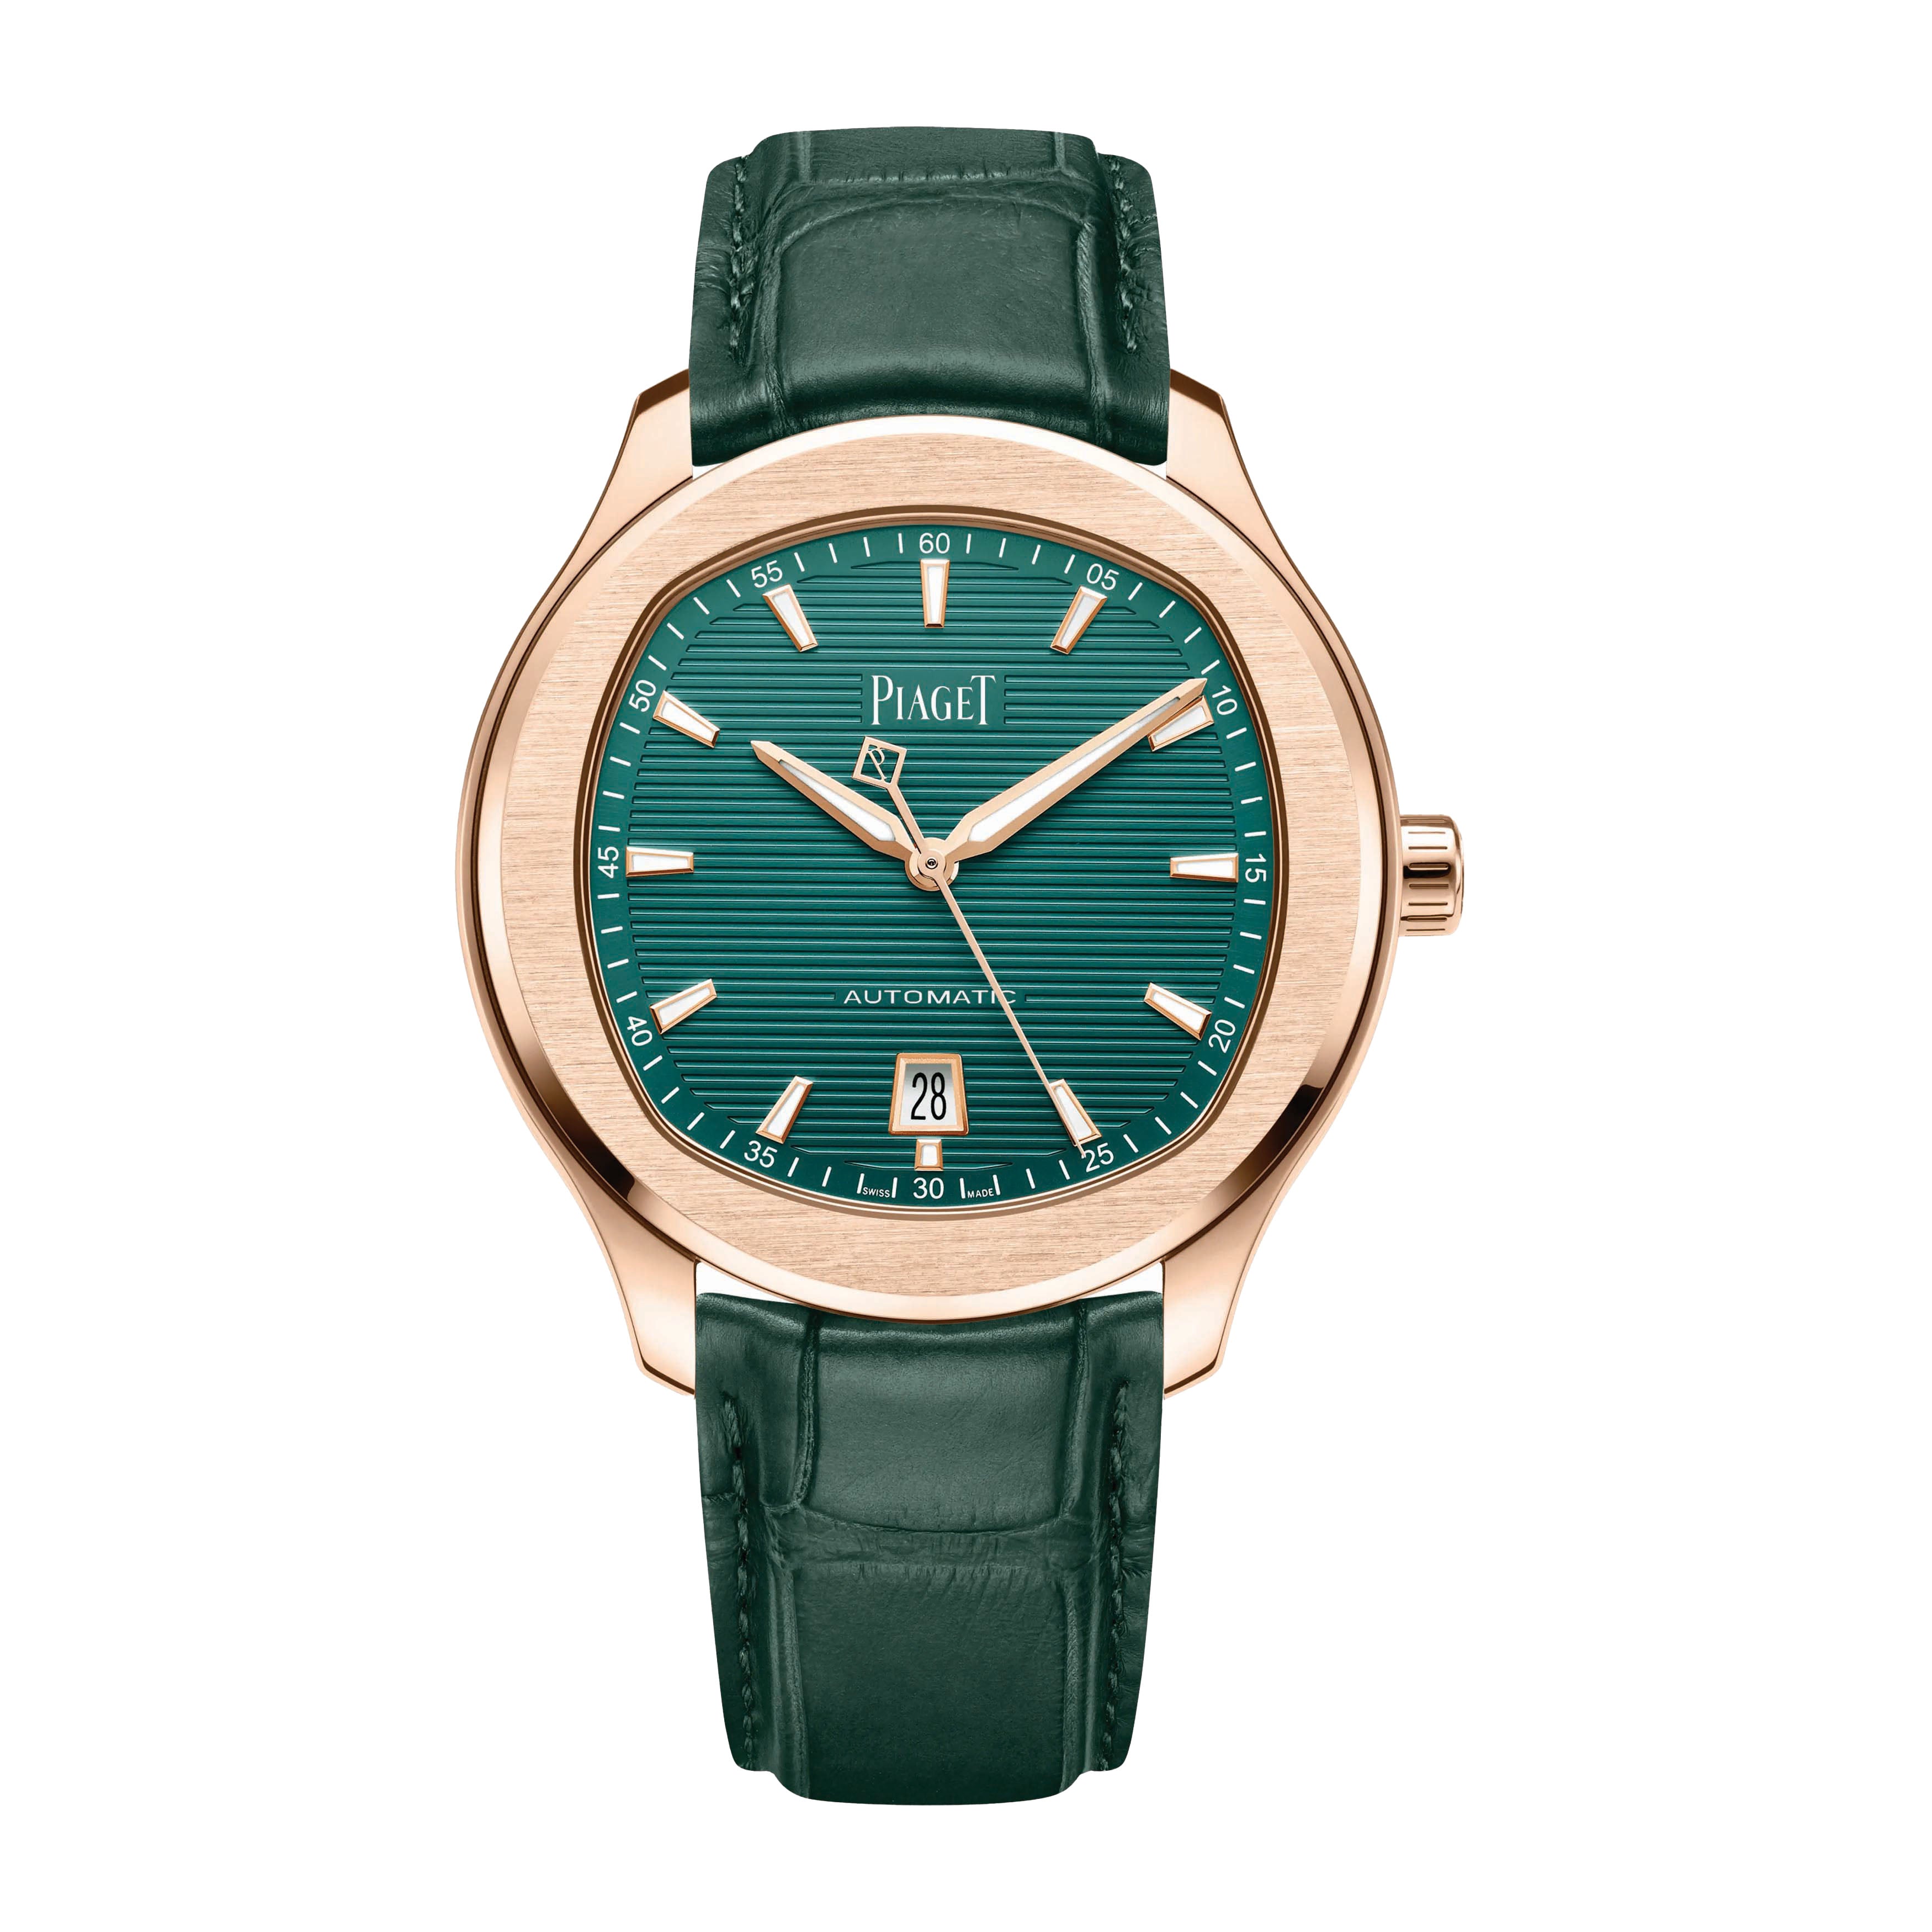 Piaget Polo Date Watch, 42mm Green Dial, G0A47010